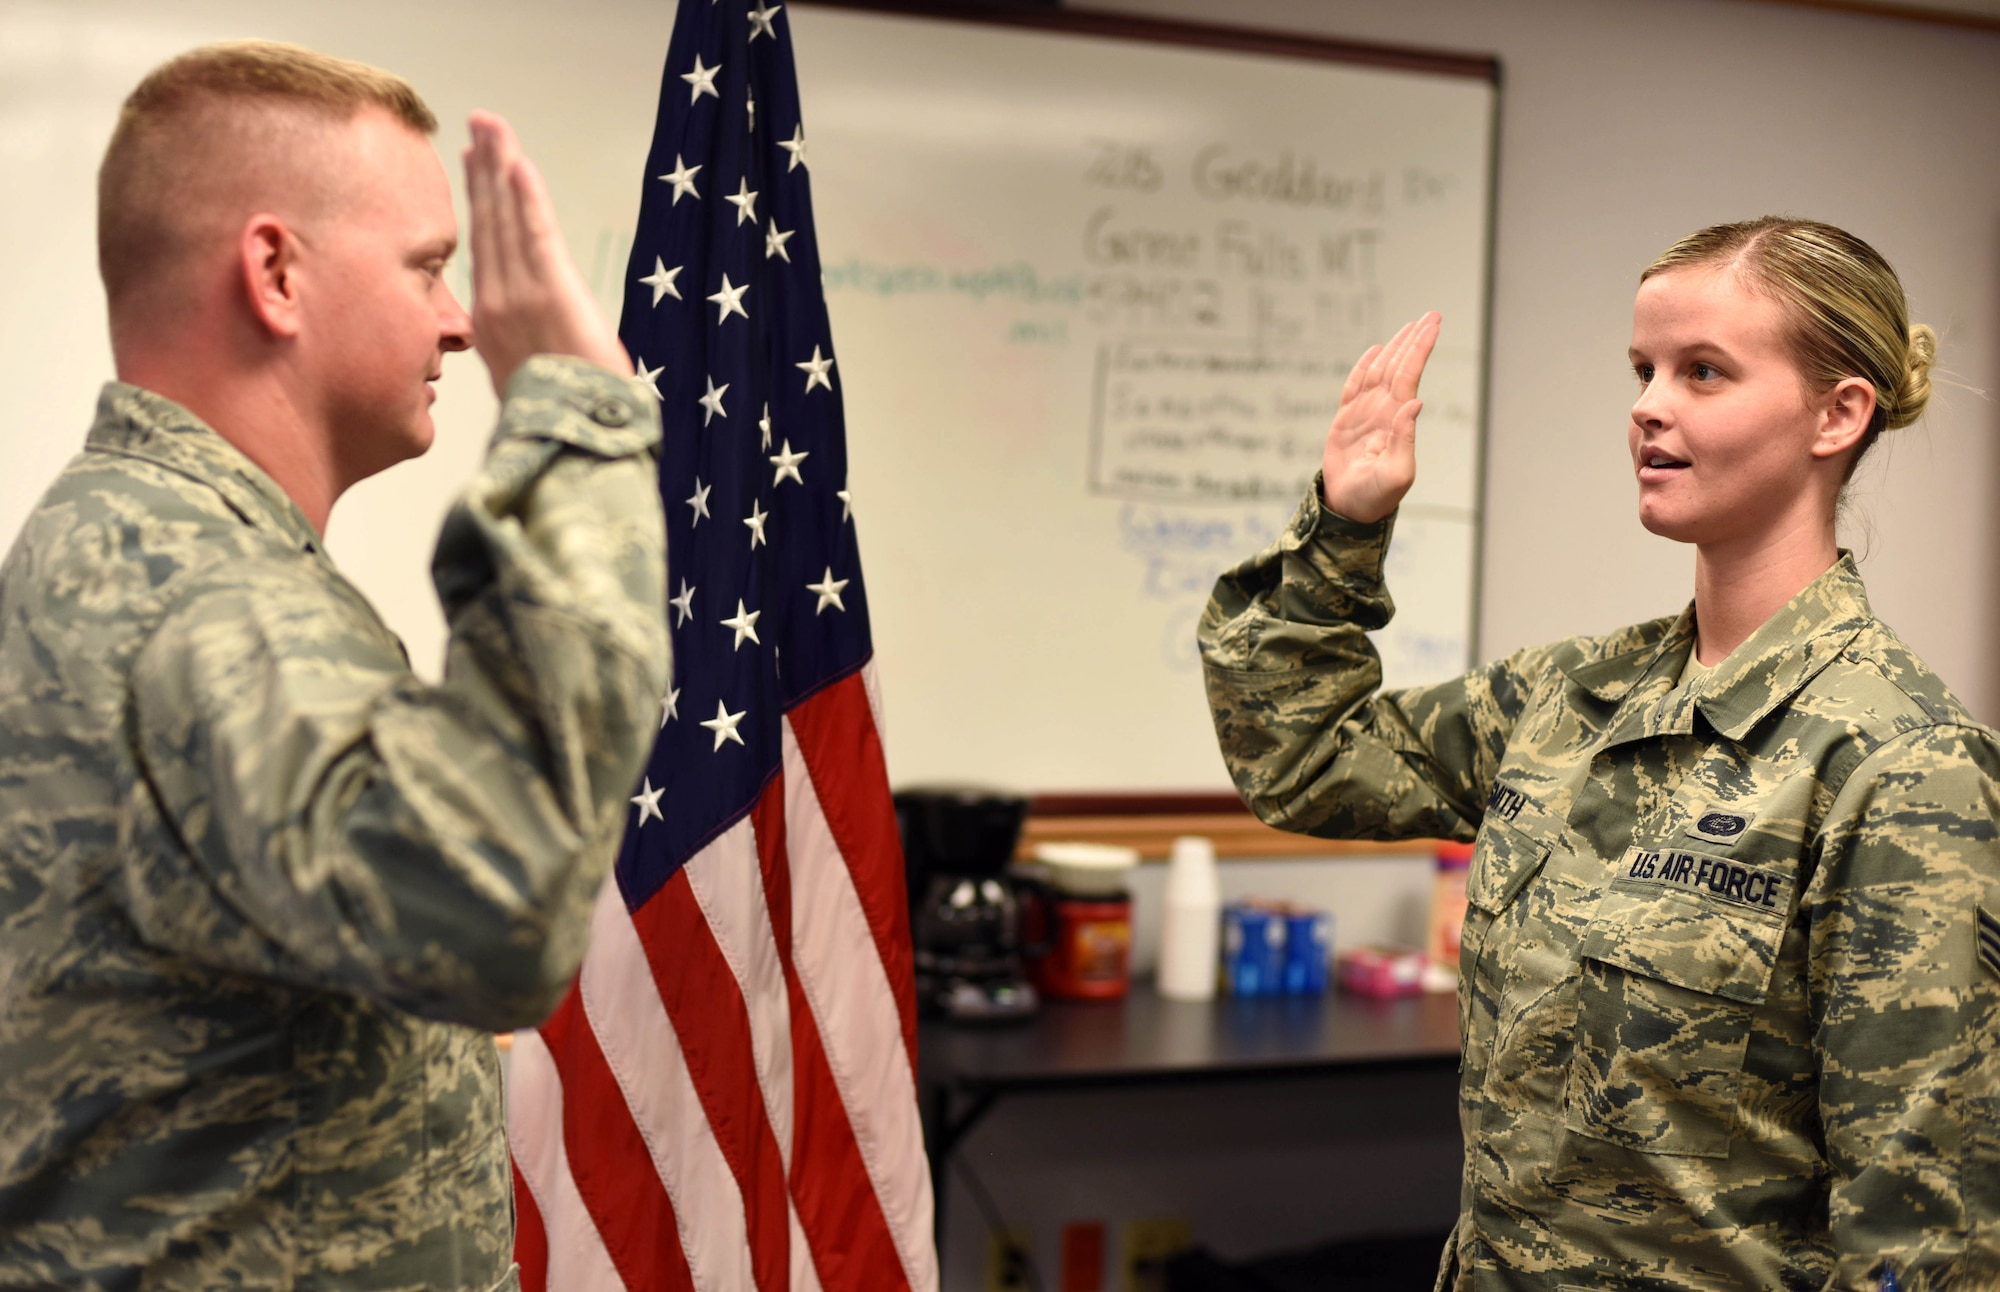 Senior Airman Jessica Smith, 341st Force Support Squadron force management journeyman, right, recites the Oath of Enlistment during a practice ceremony at Malmstrom Air Force Base, Mont., Aug. 24. Capt. Phillip Martin, 341st FSS operations officer, presides over the ceremony. (U.S. Air Force photo Airman 1st Class Collin Schmidt) 